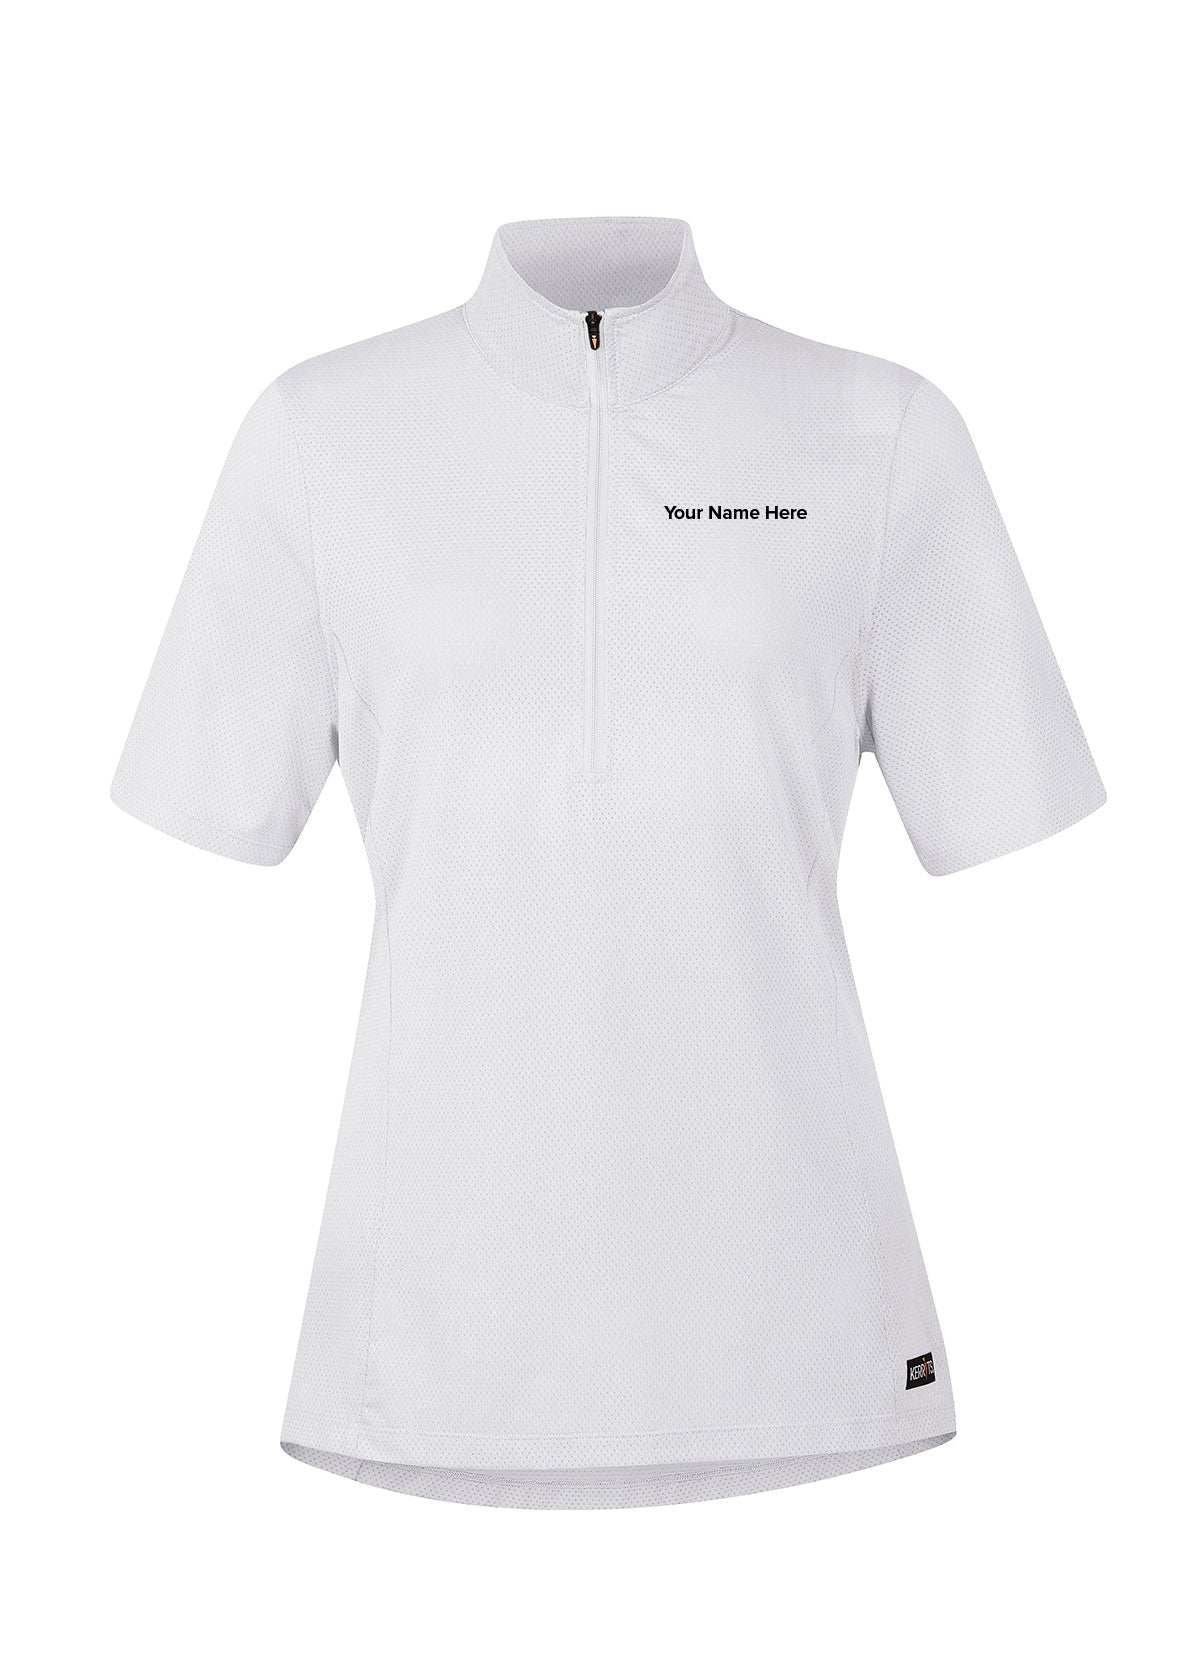 White::variant::Ice Fil Short Sleeve Riding Top for Clubs